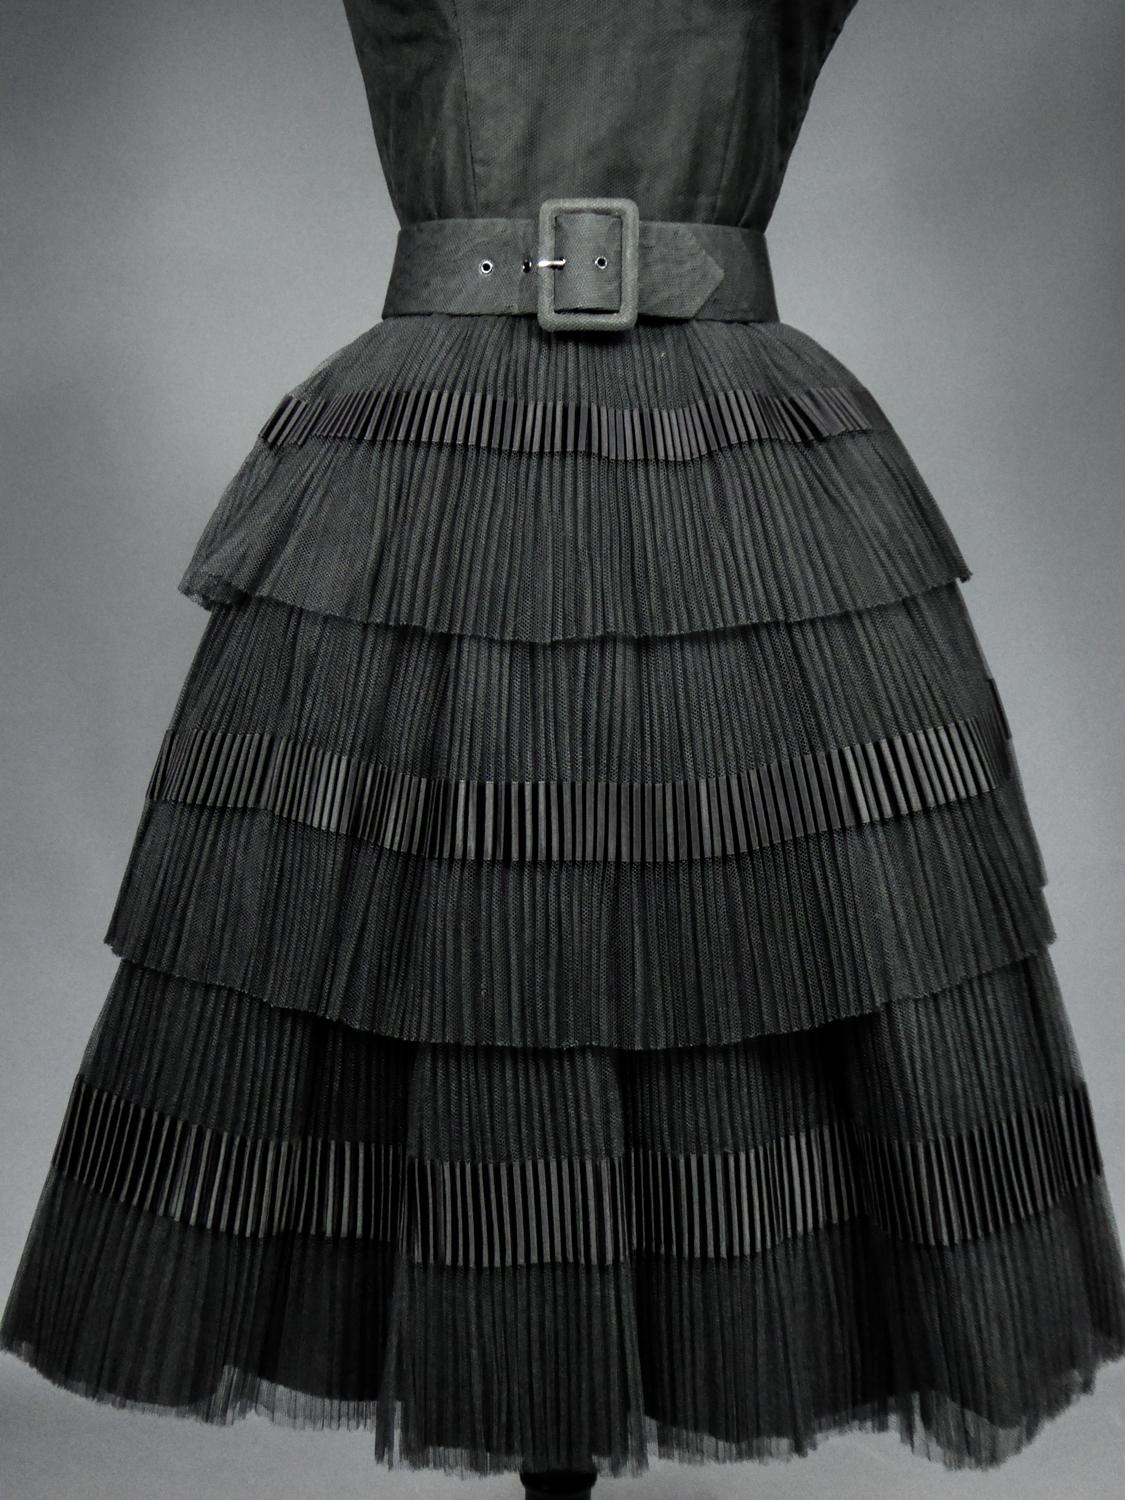 Women's A Nina Ricci Couture Cocktail Dress in Embossed Tulle and Ribbon Circa 1958/1962